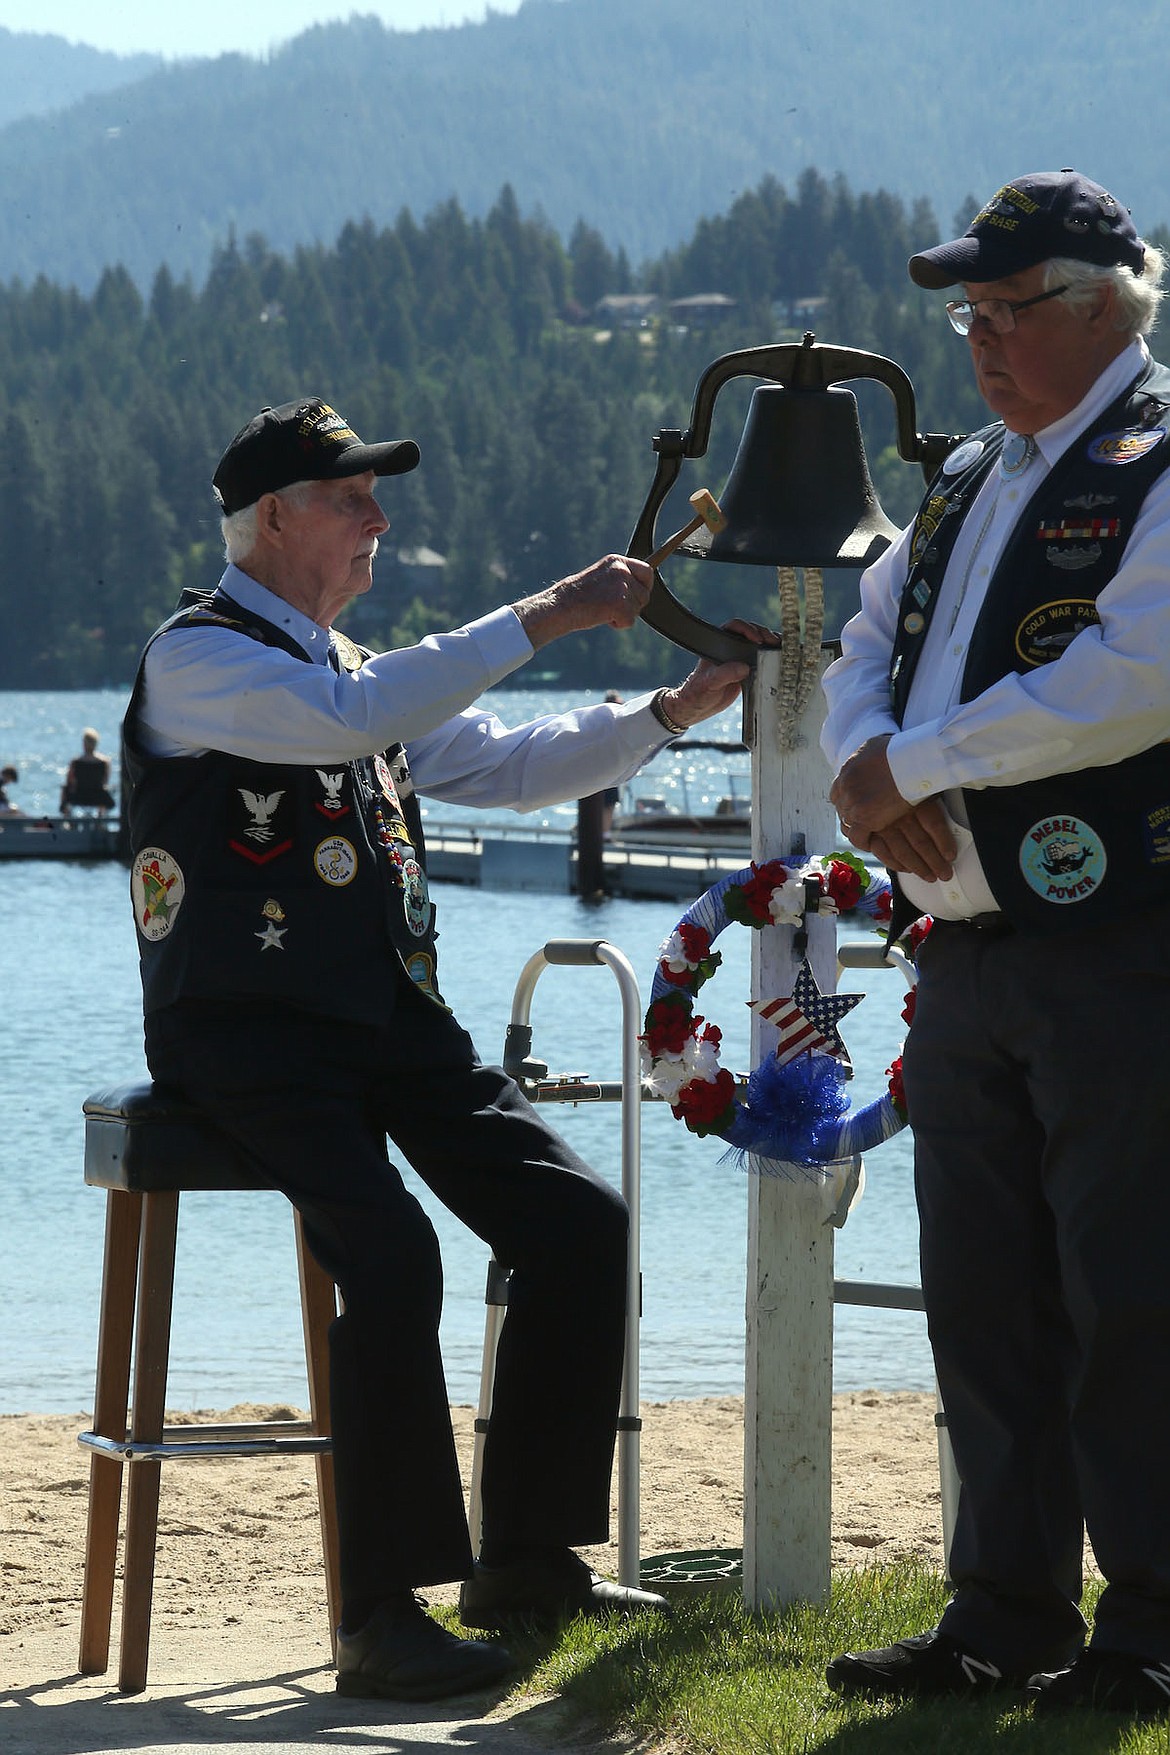 With Jerry Parker looking on, Tom DePew tolled the bell for U.S. submarines lost at sea during a Memorial Day ceremony at Lake Hayden Monday. (JUDD WILSON/Press)